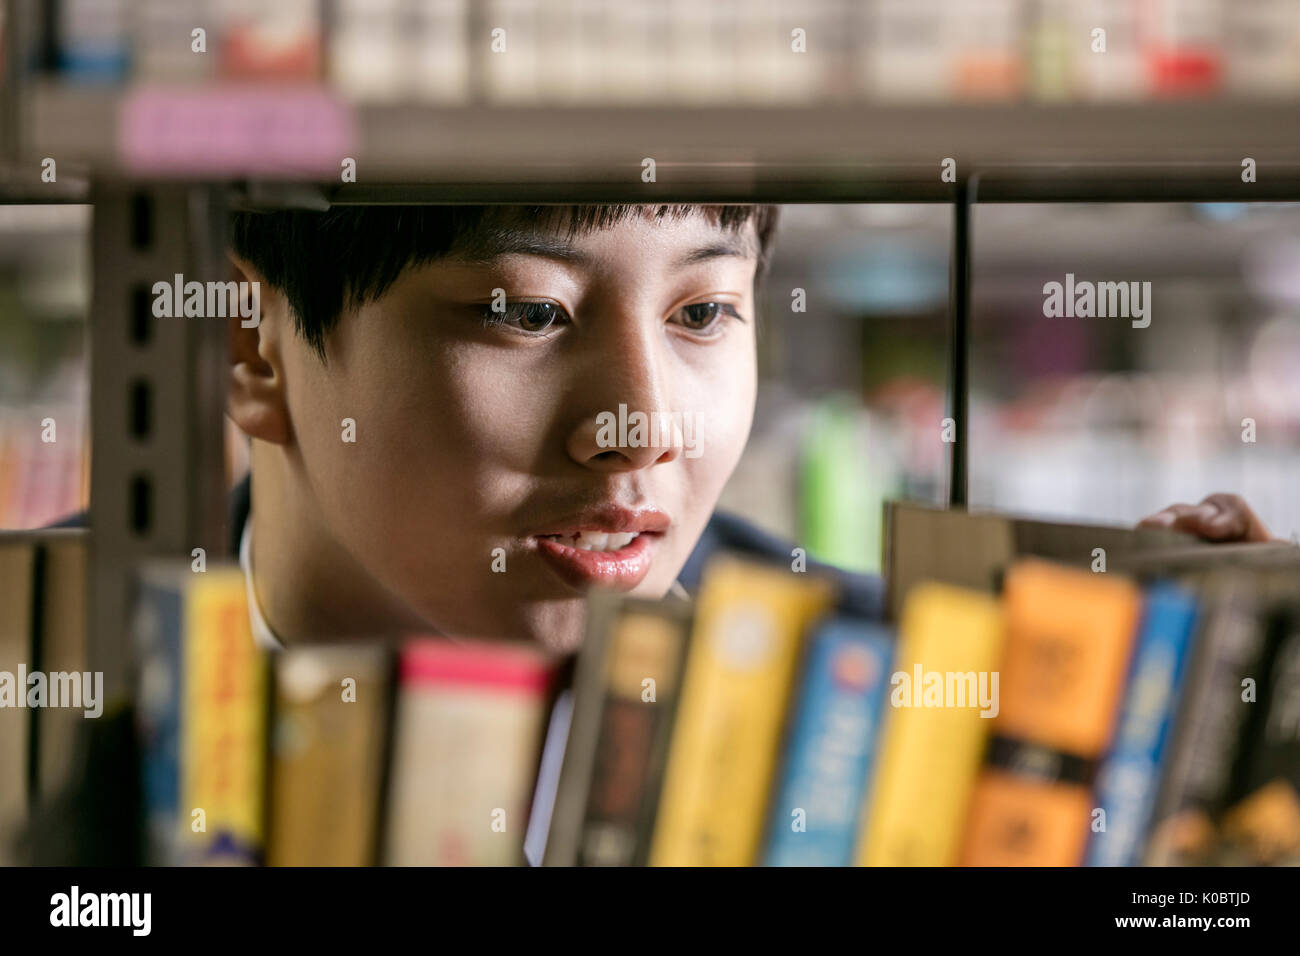 Face of school boy looking for a book in library Stock Photo